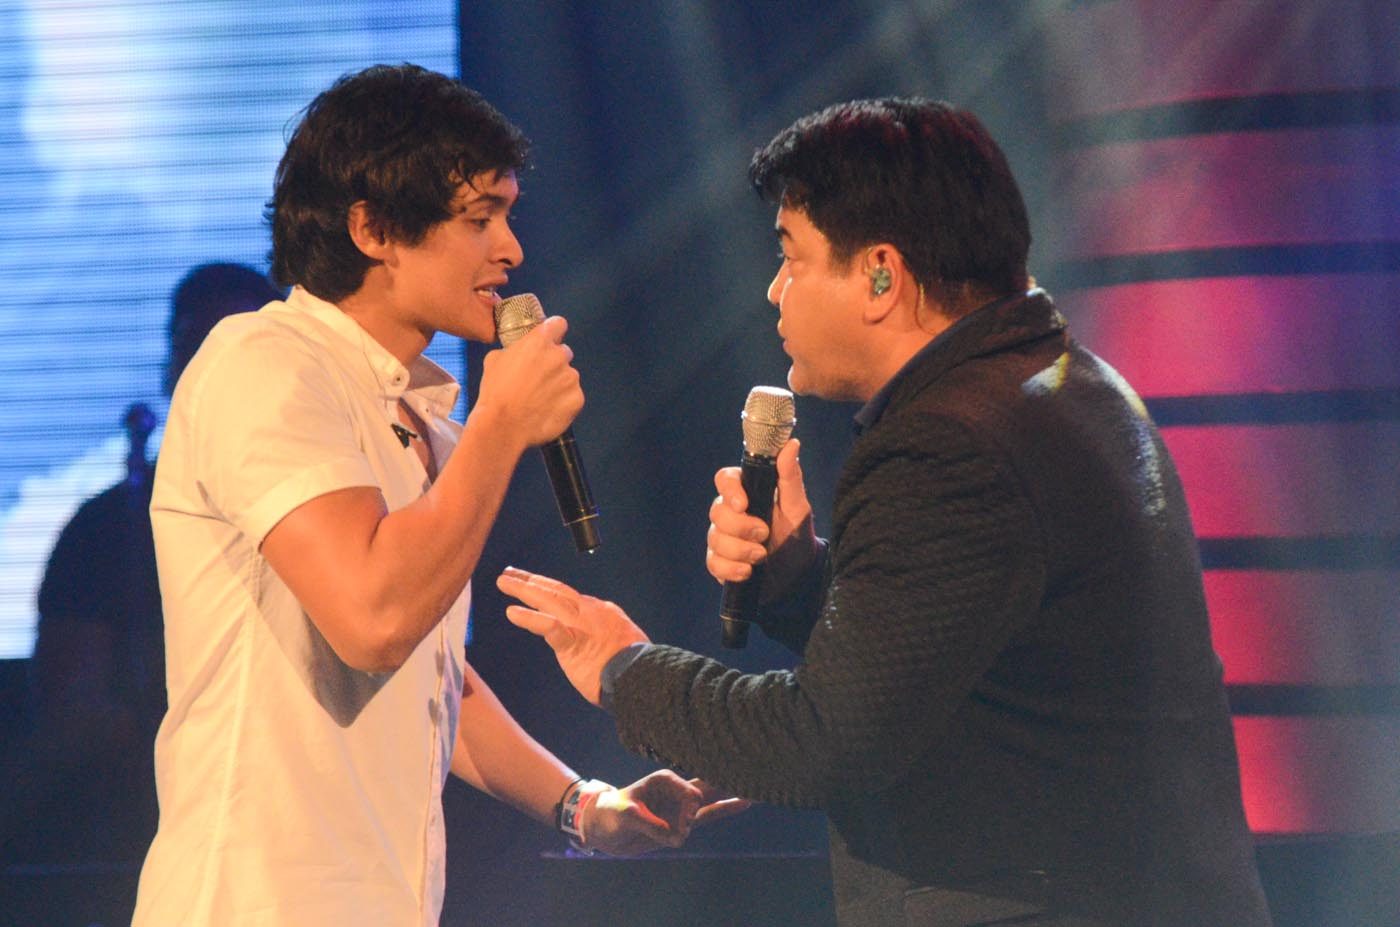 IN PHOTOS: Matteo Guidicelli’s 1st solo concert, ‘MG1’